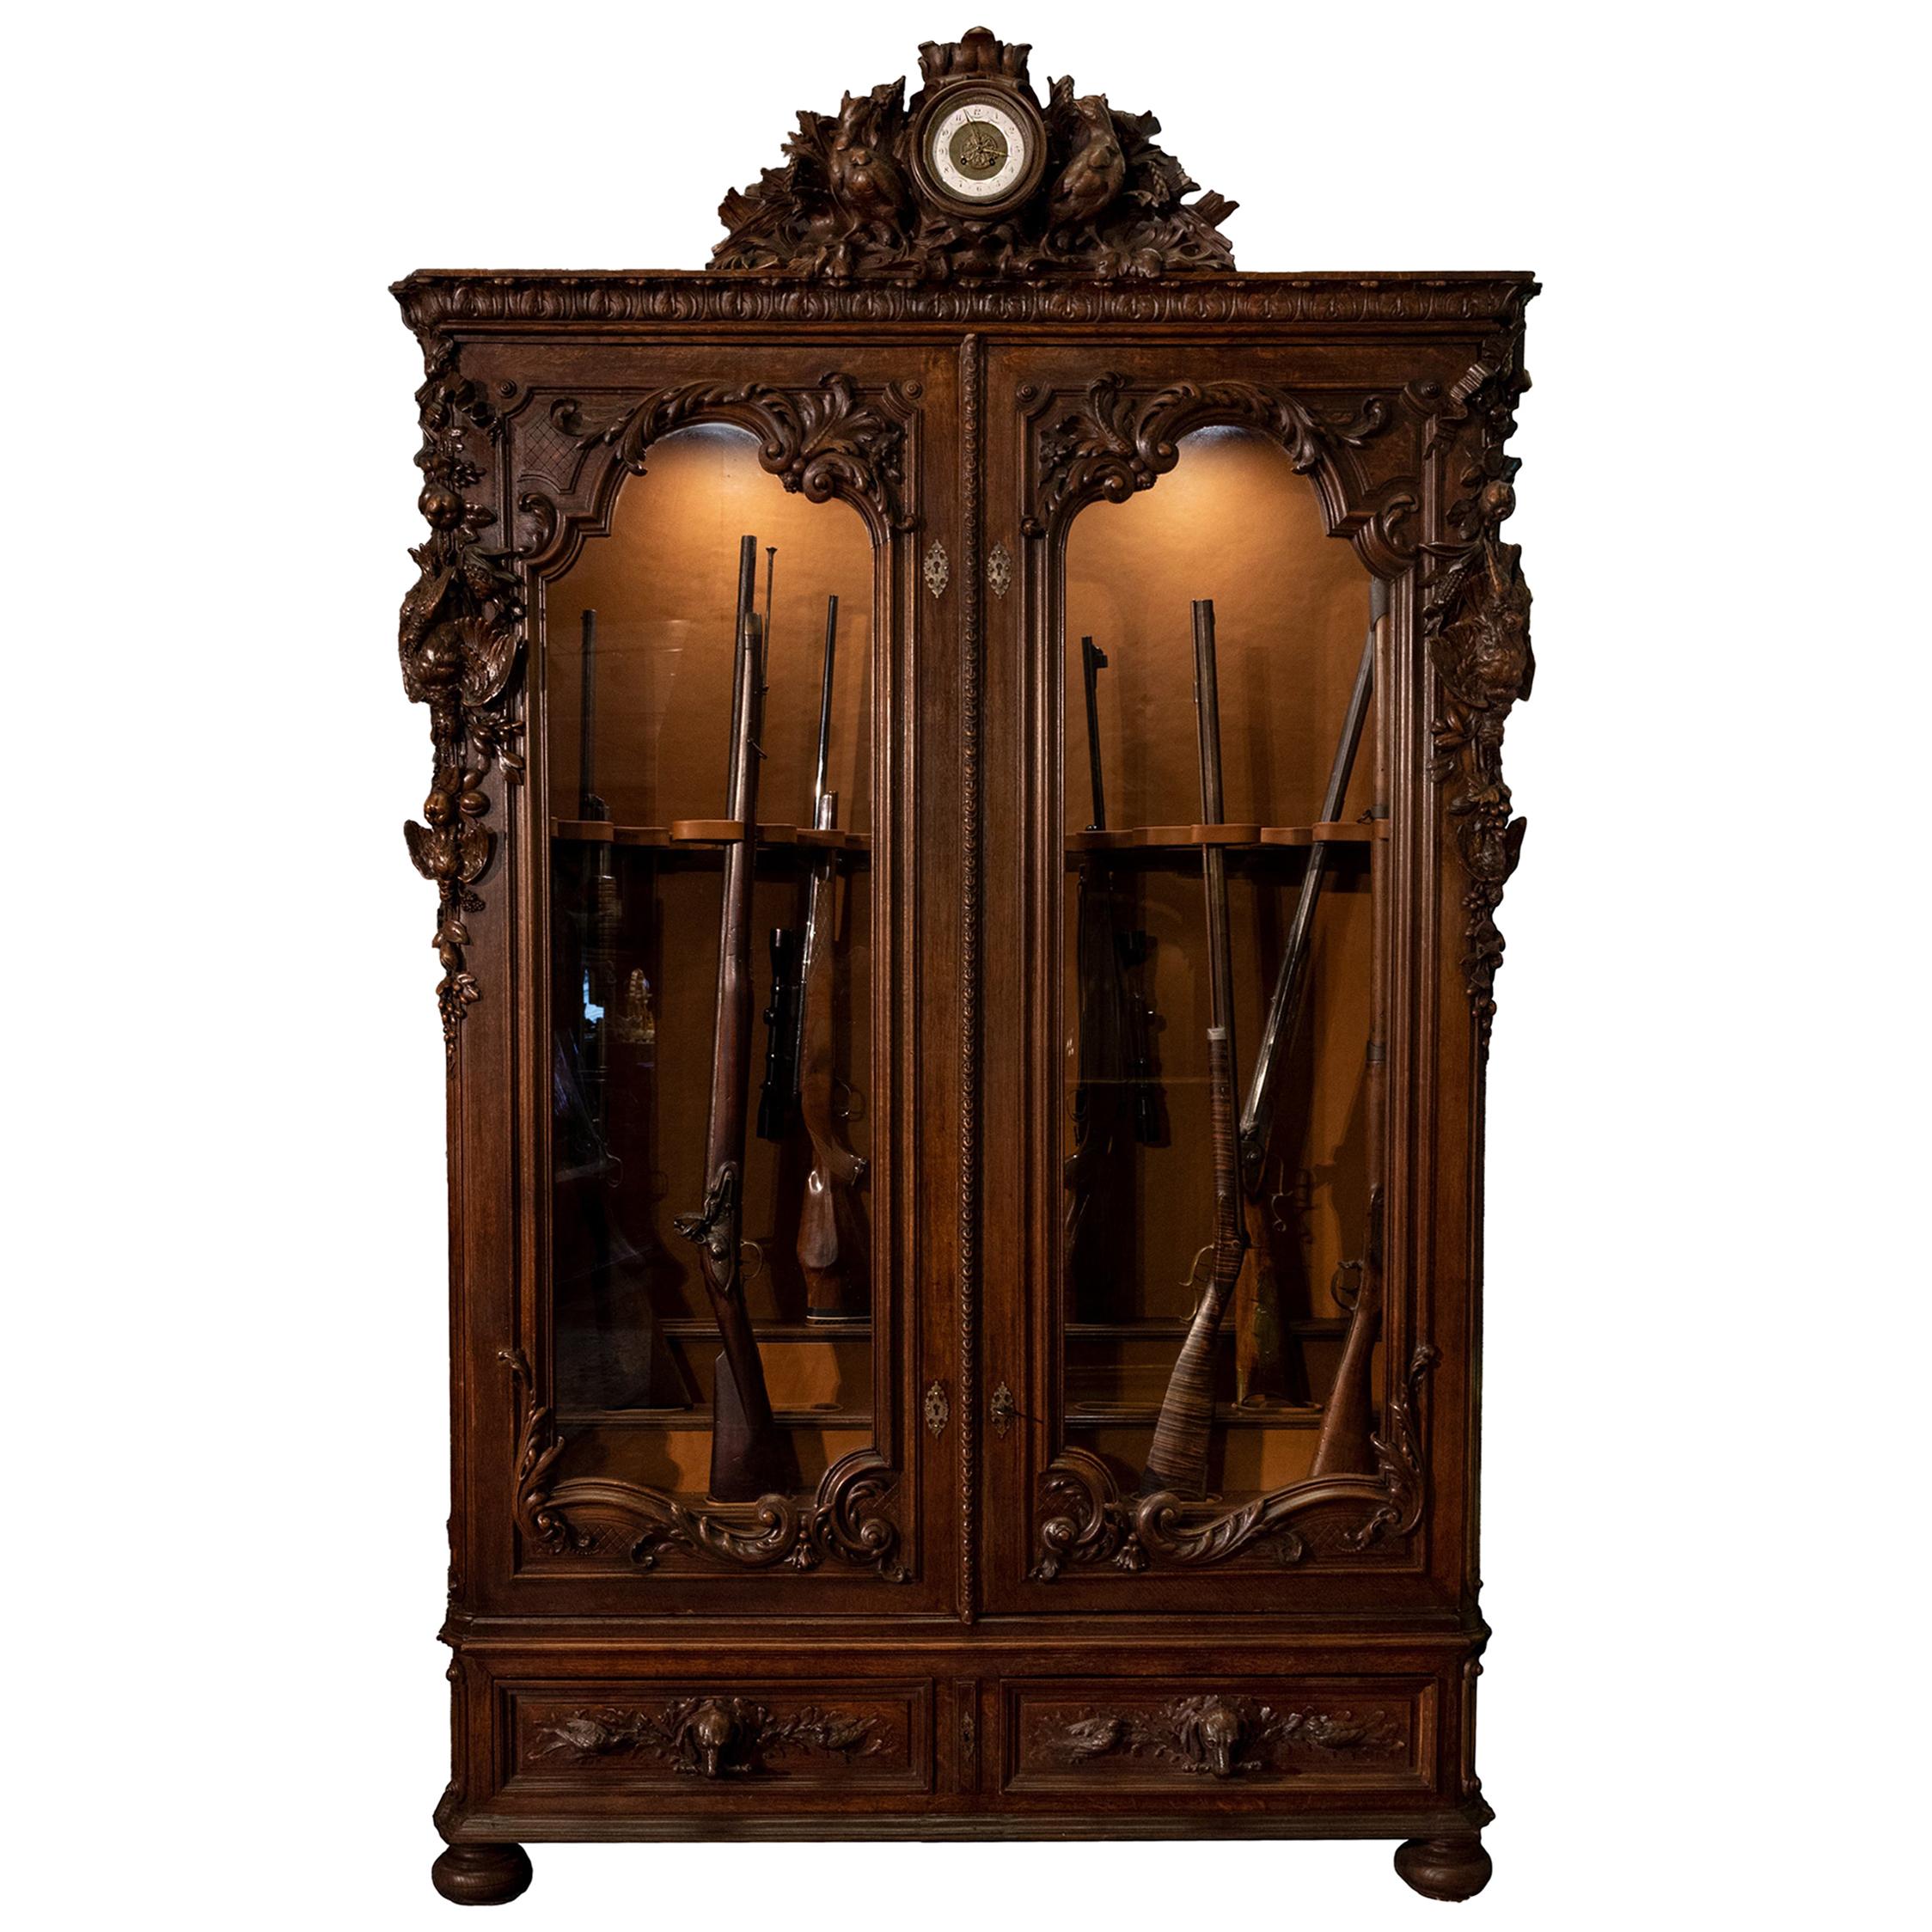 Monumental French Hunt-Style Gun Display Cabinet